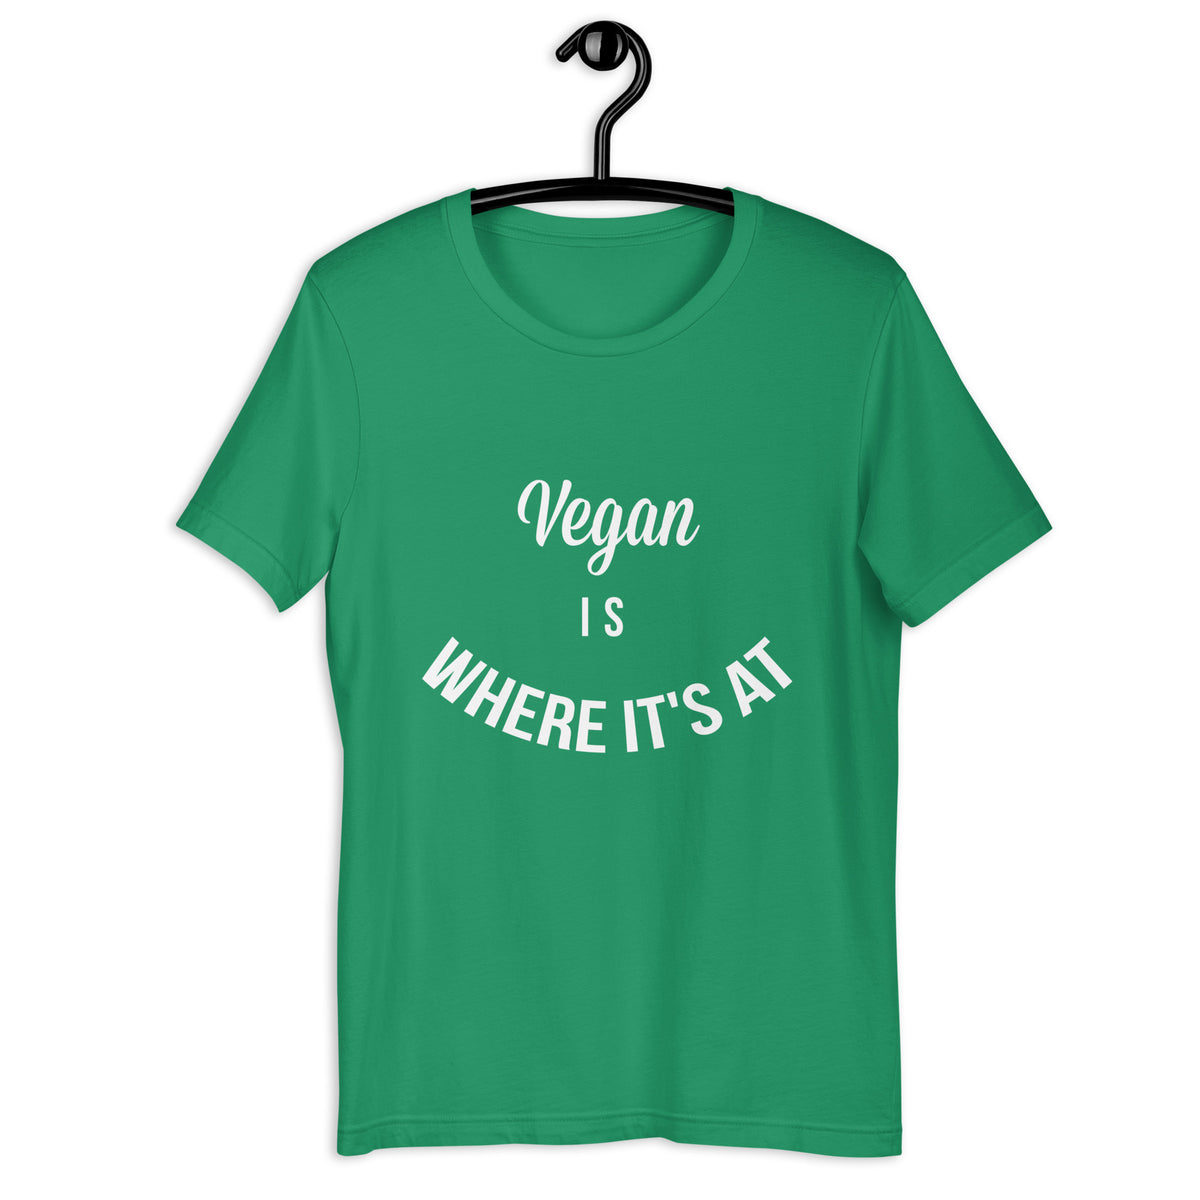 VEGAN IS WHERE IT'S AT Colored t-shirt